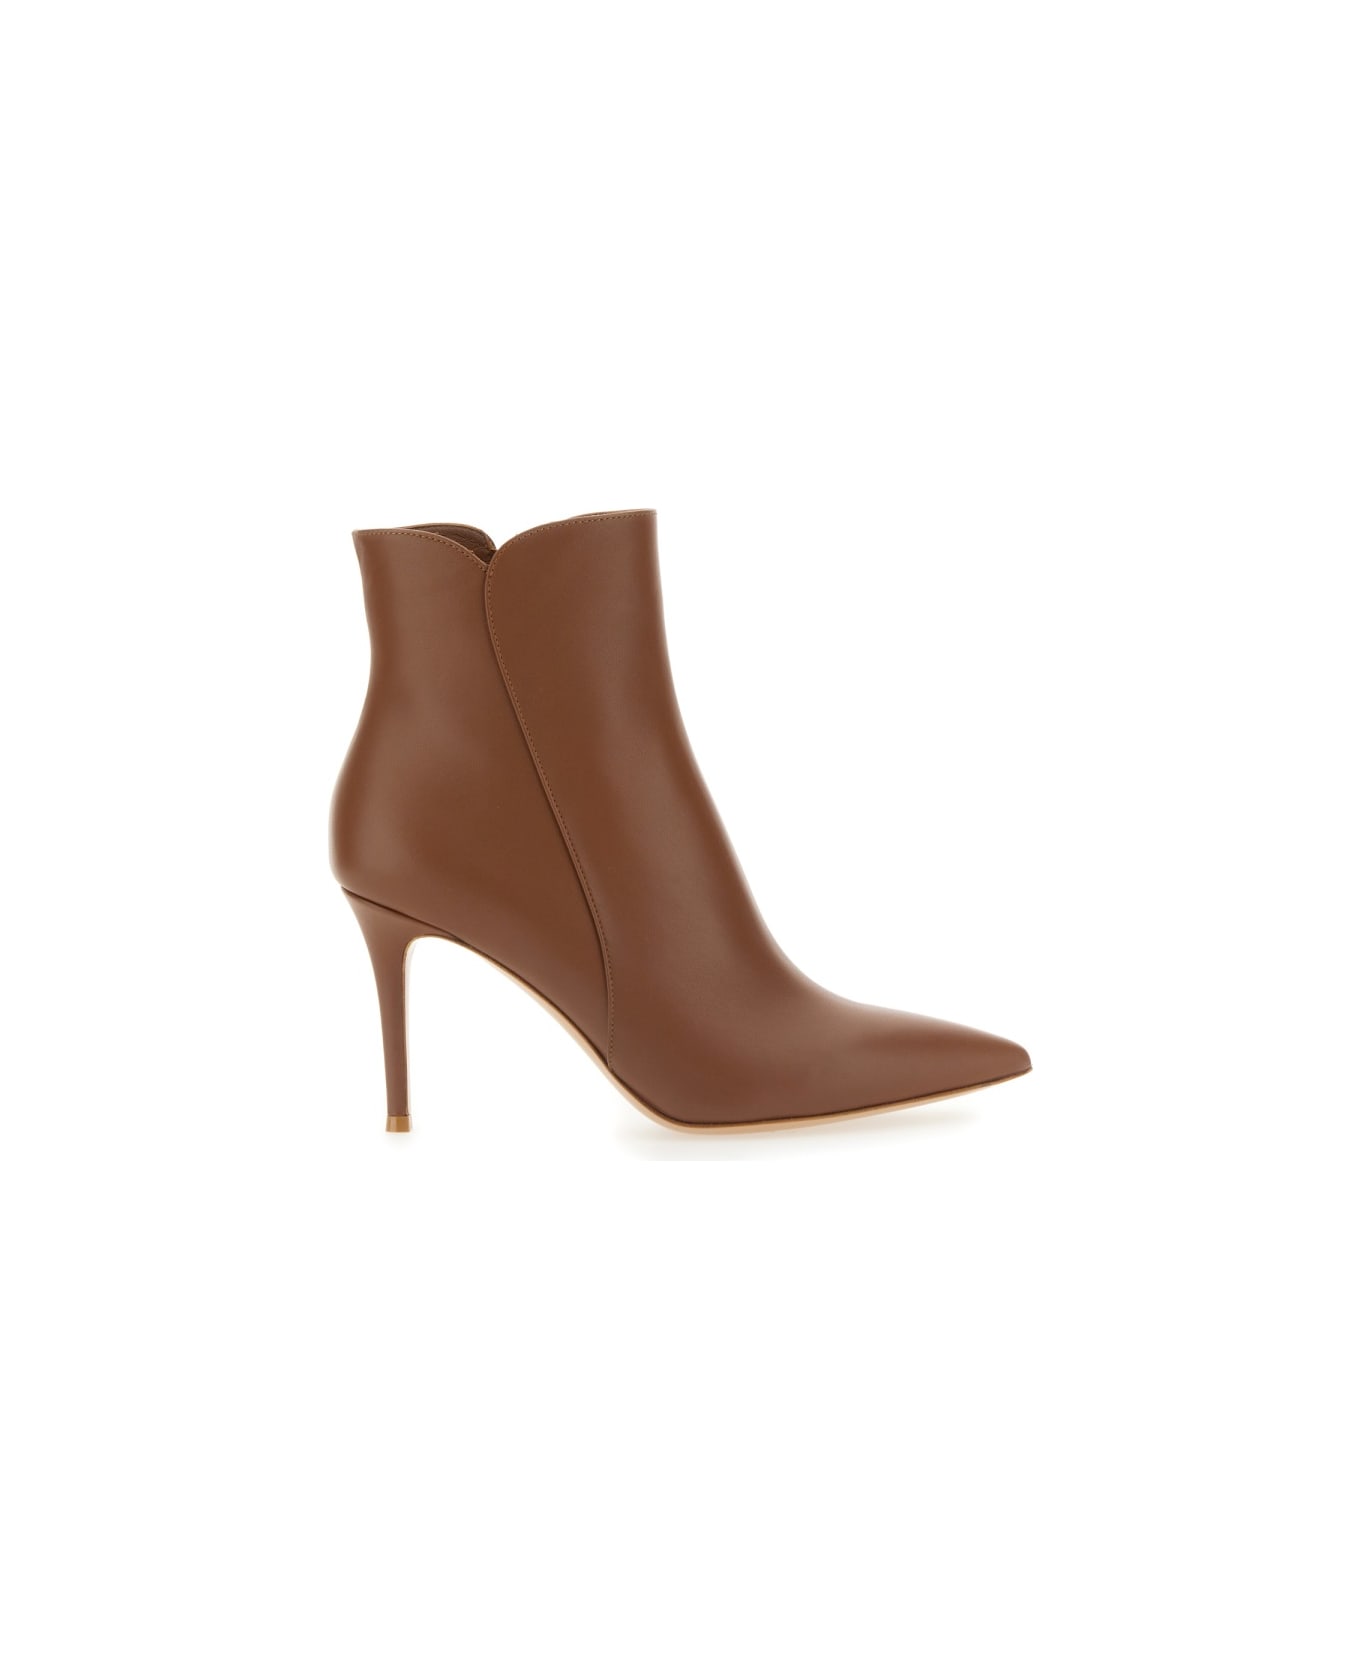 Gianvito Rossi Levy 85 Boot - BUFF